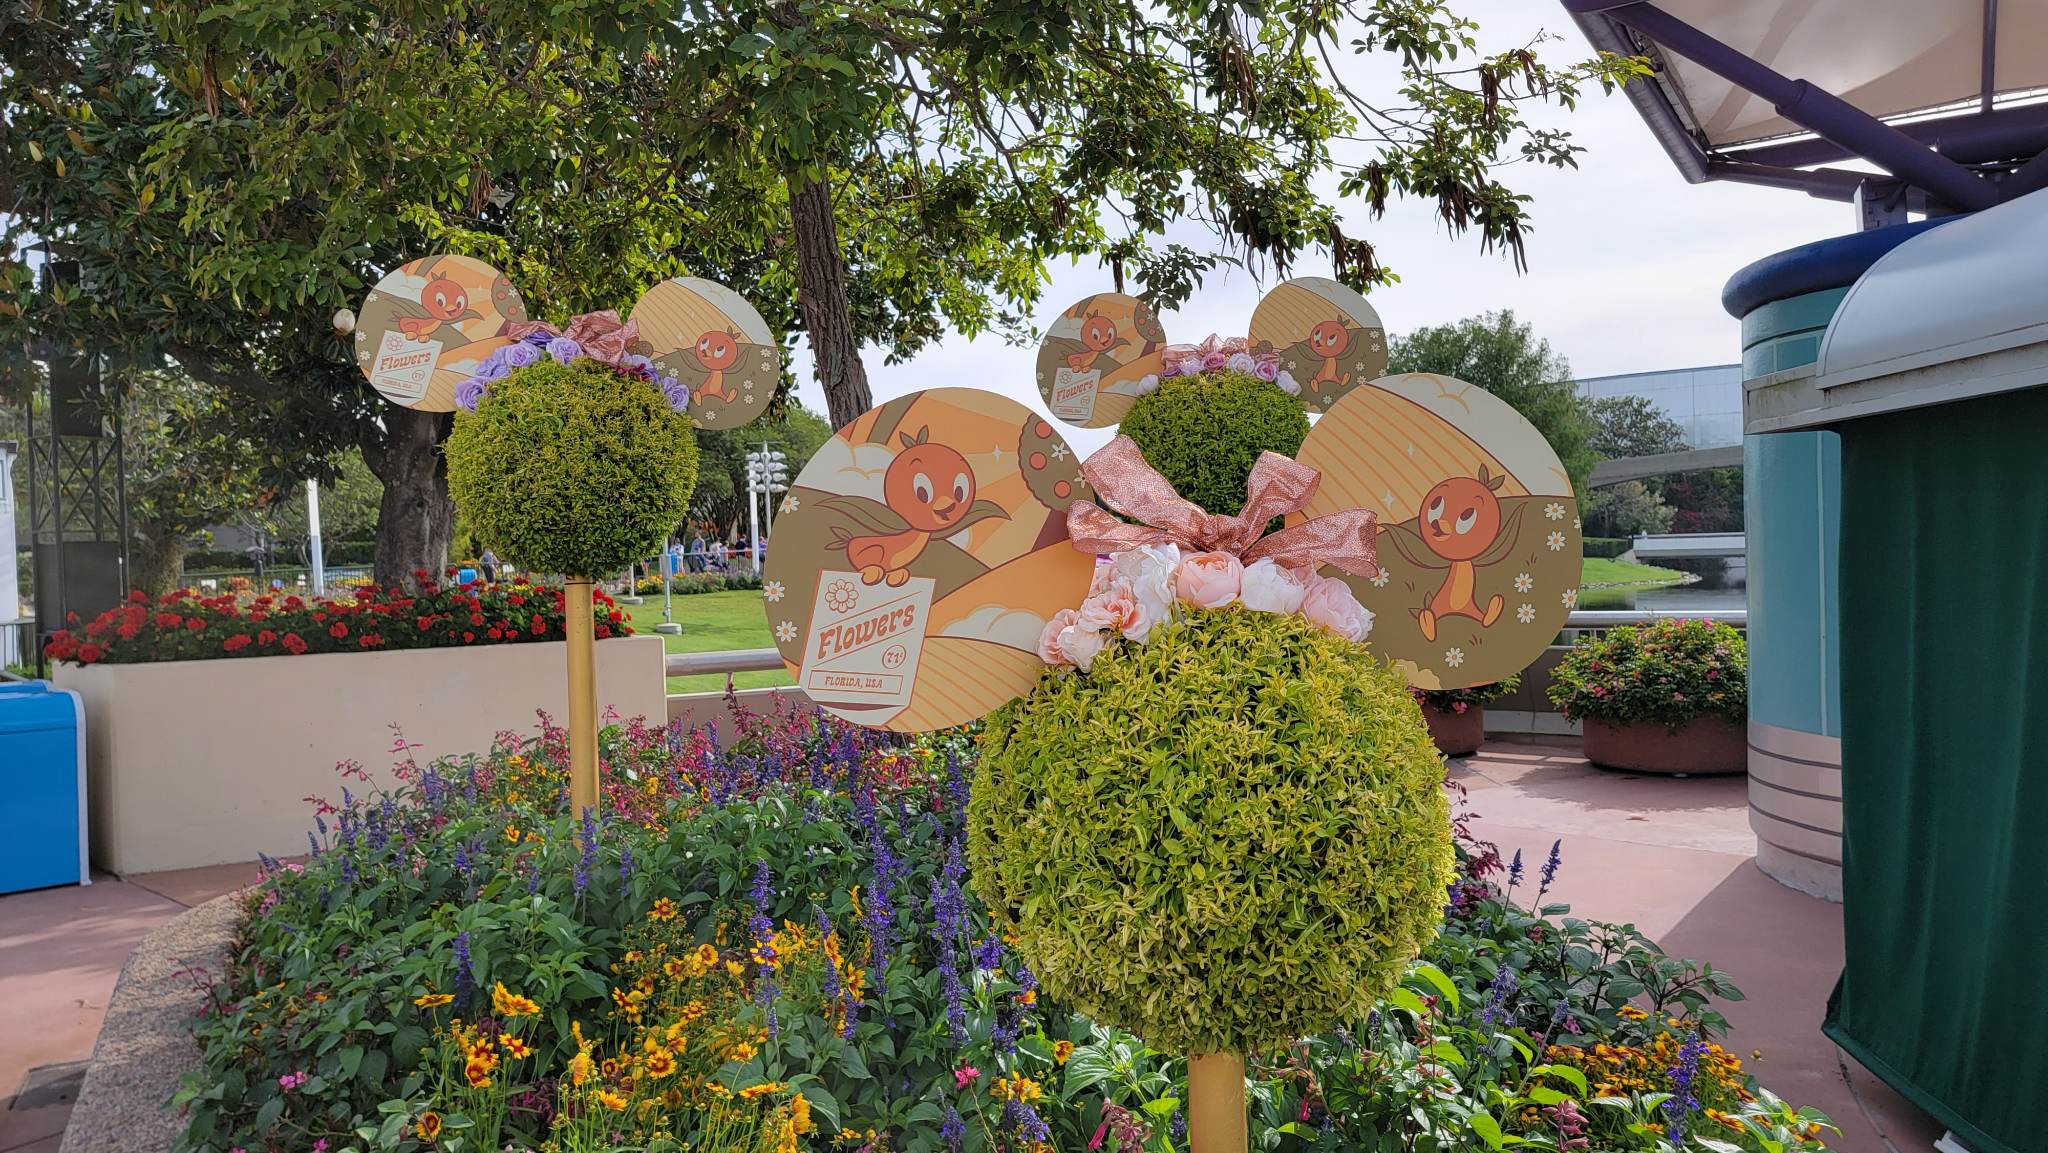 New Orange Bird Ear Topiaries Now on Display in EPCOT for the Flower & Garden Festival